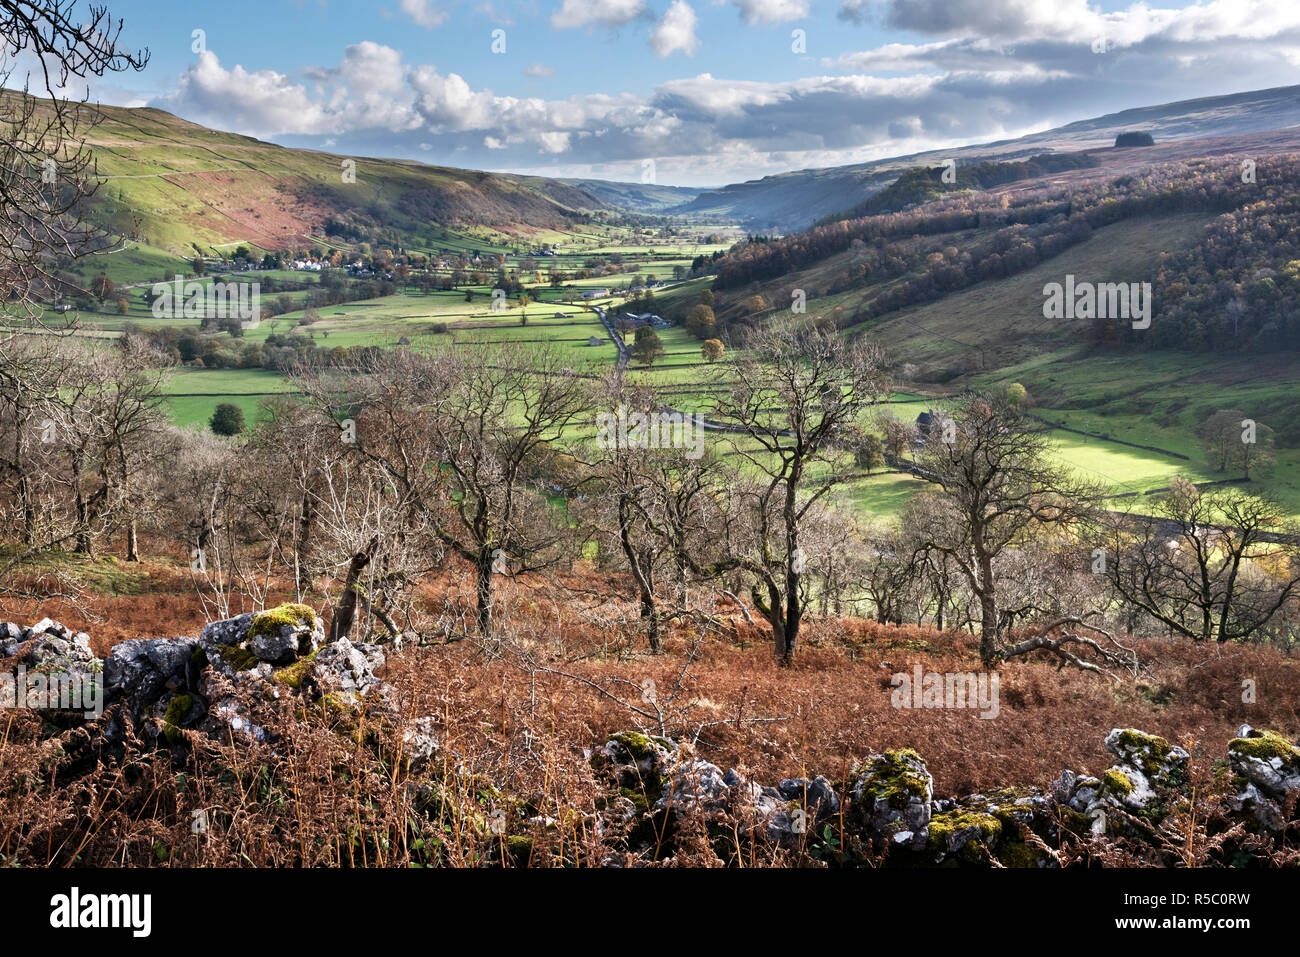 Upper Wharfedale, Yorkshire Dales National Park. The village of Buckden can be seen centre. Stock Photo